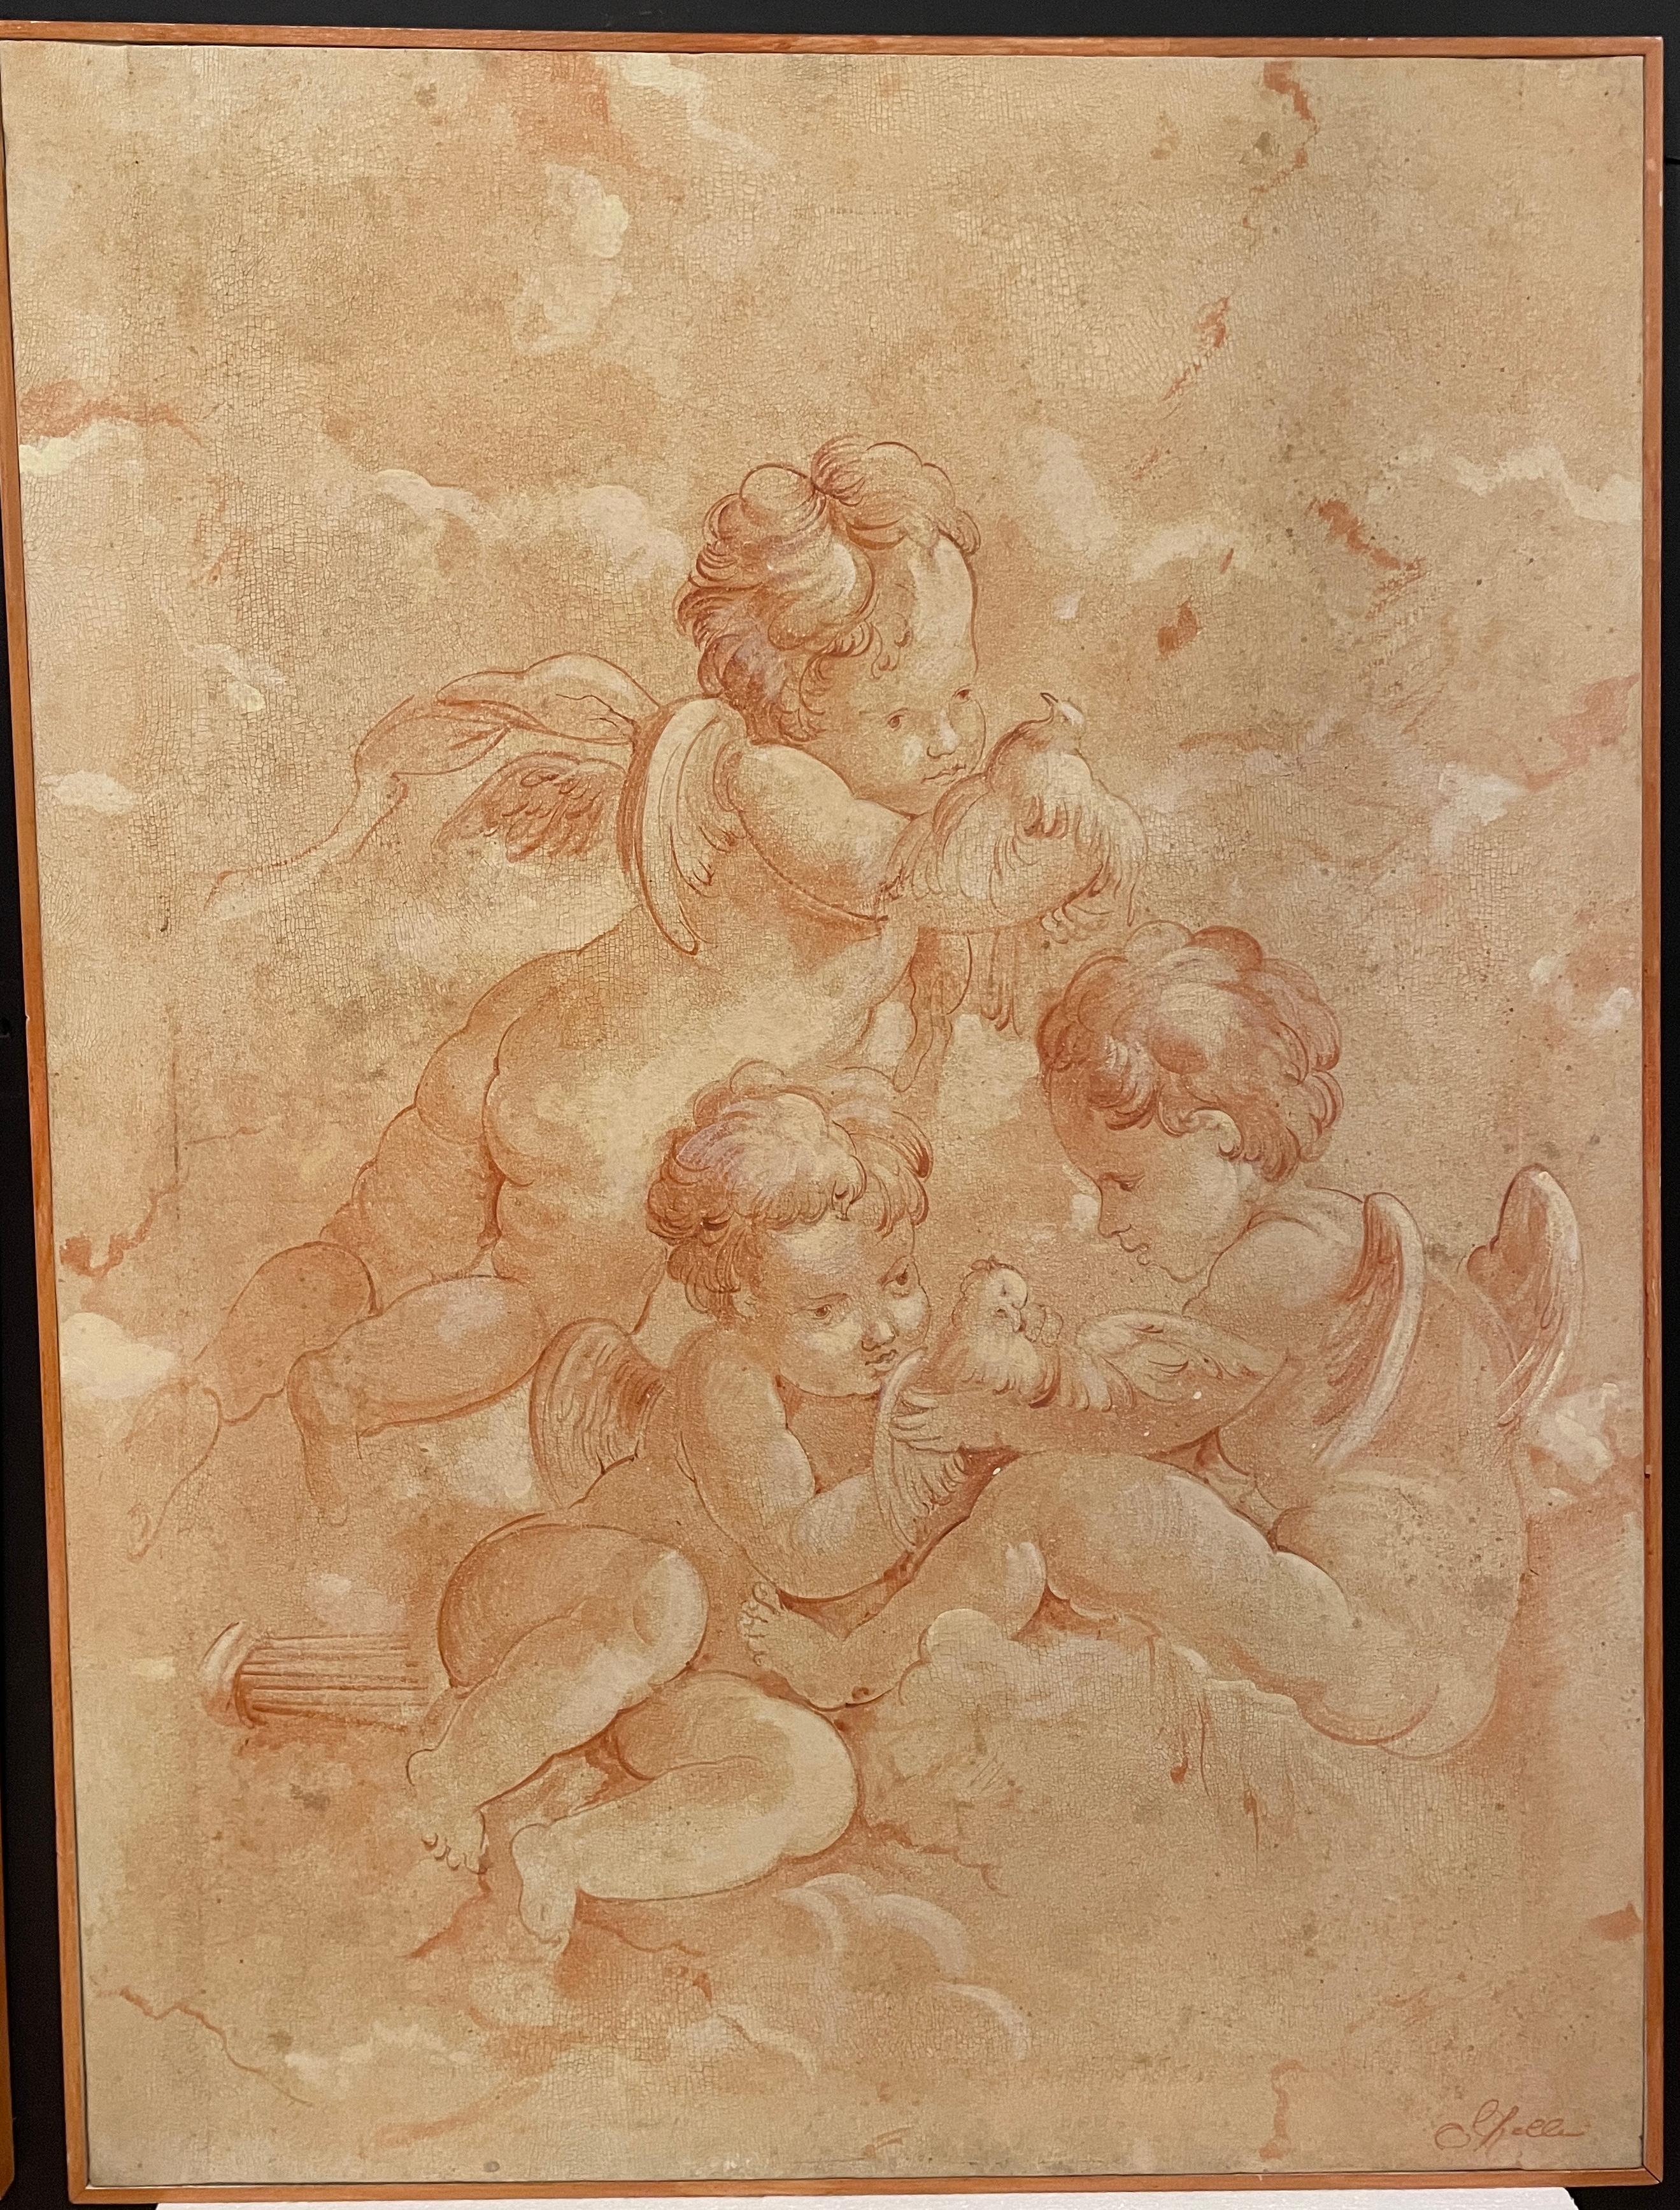 Vintage sepia drawing on canvas in the style of French and Italian Old Masters.